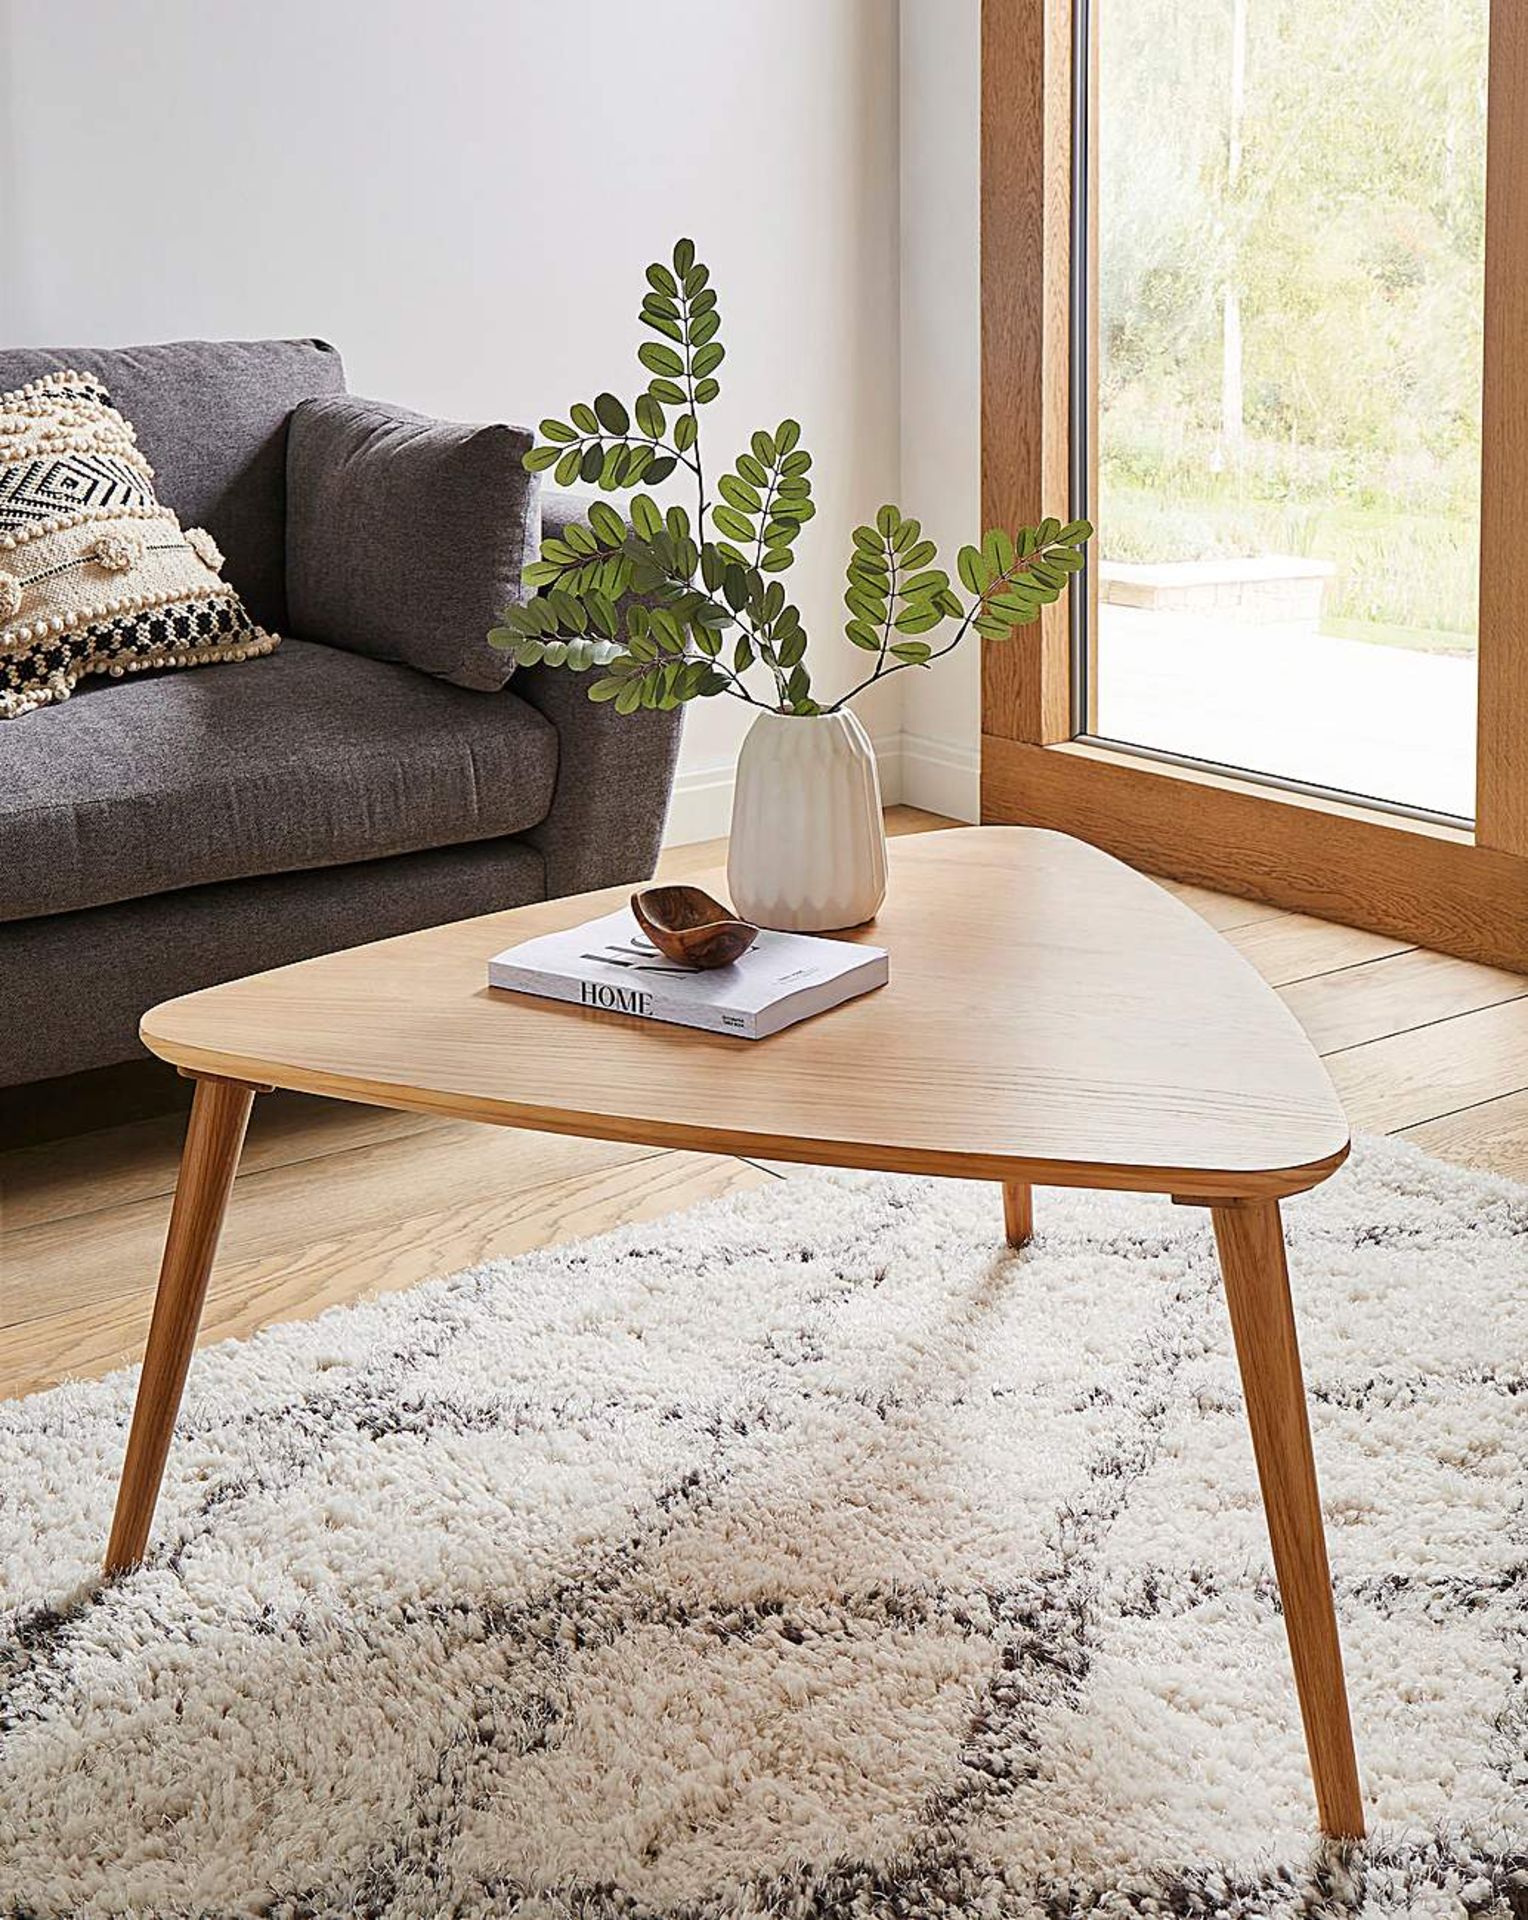 NEW & BOXED PEYTON Oak Coffee Table. RRP £269. Part of At Home Luxe, the Peyton Oak Coffee Table has